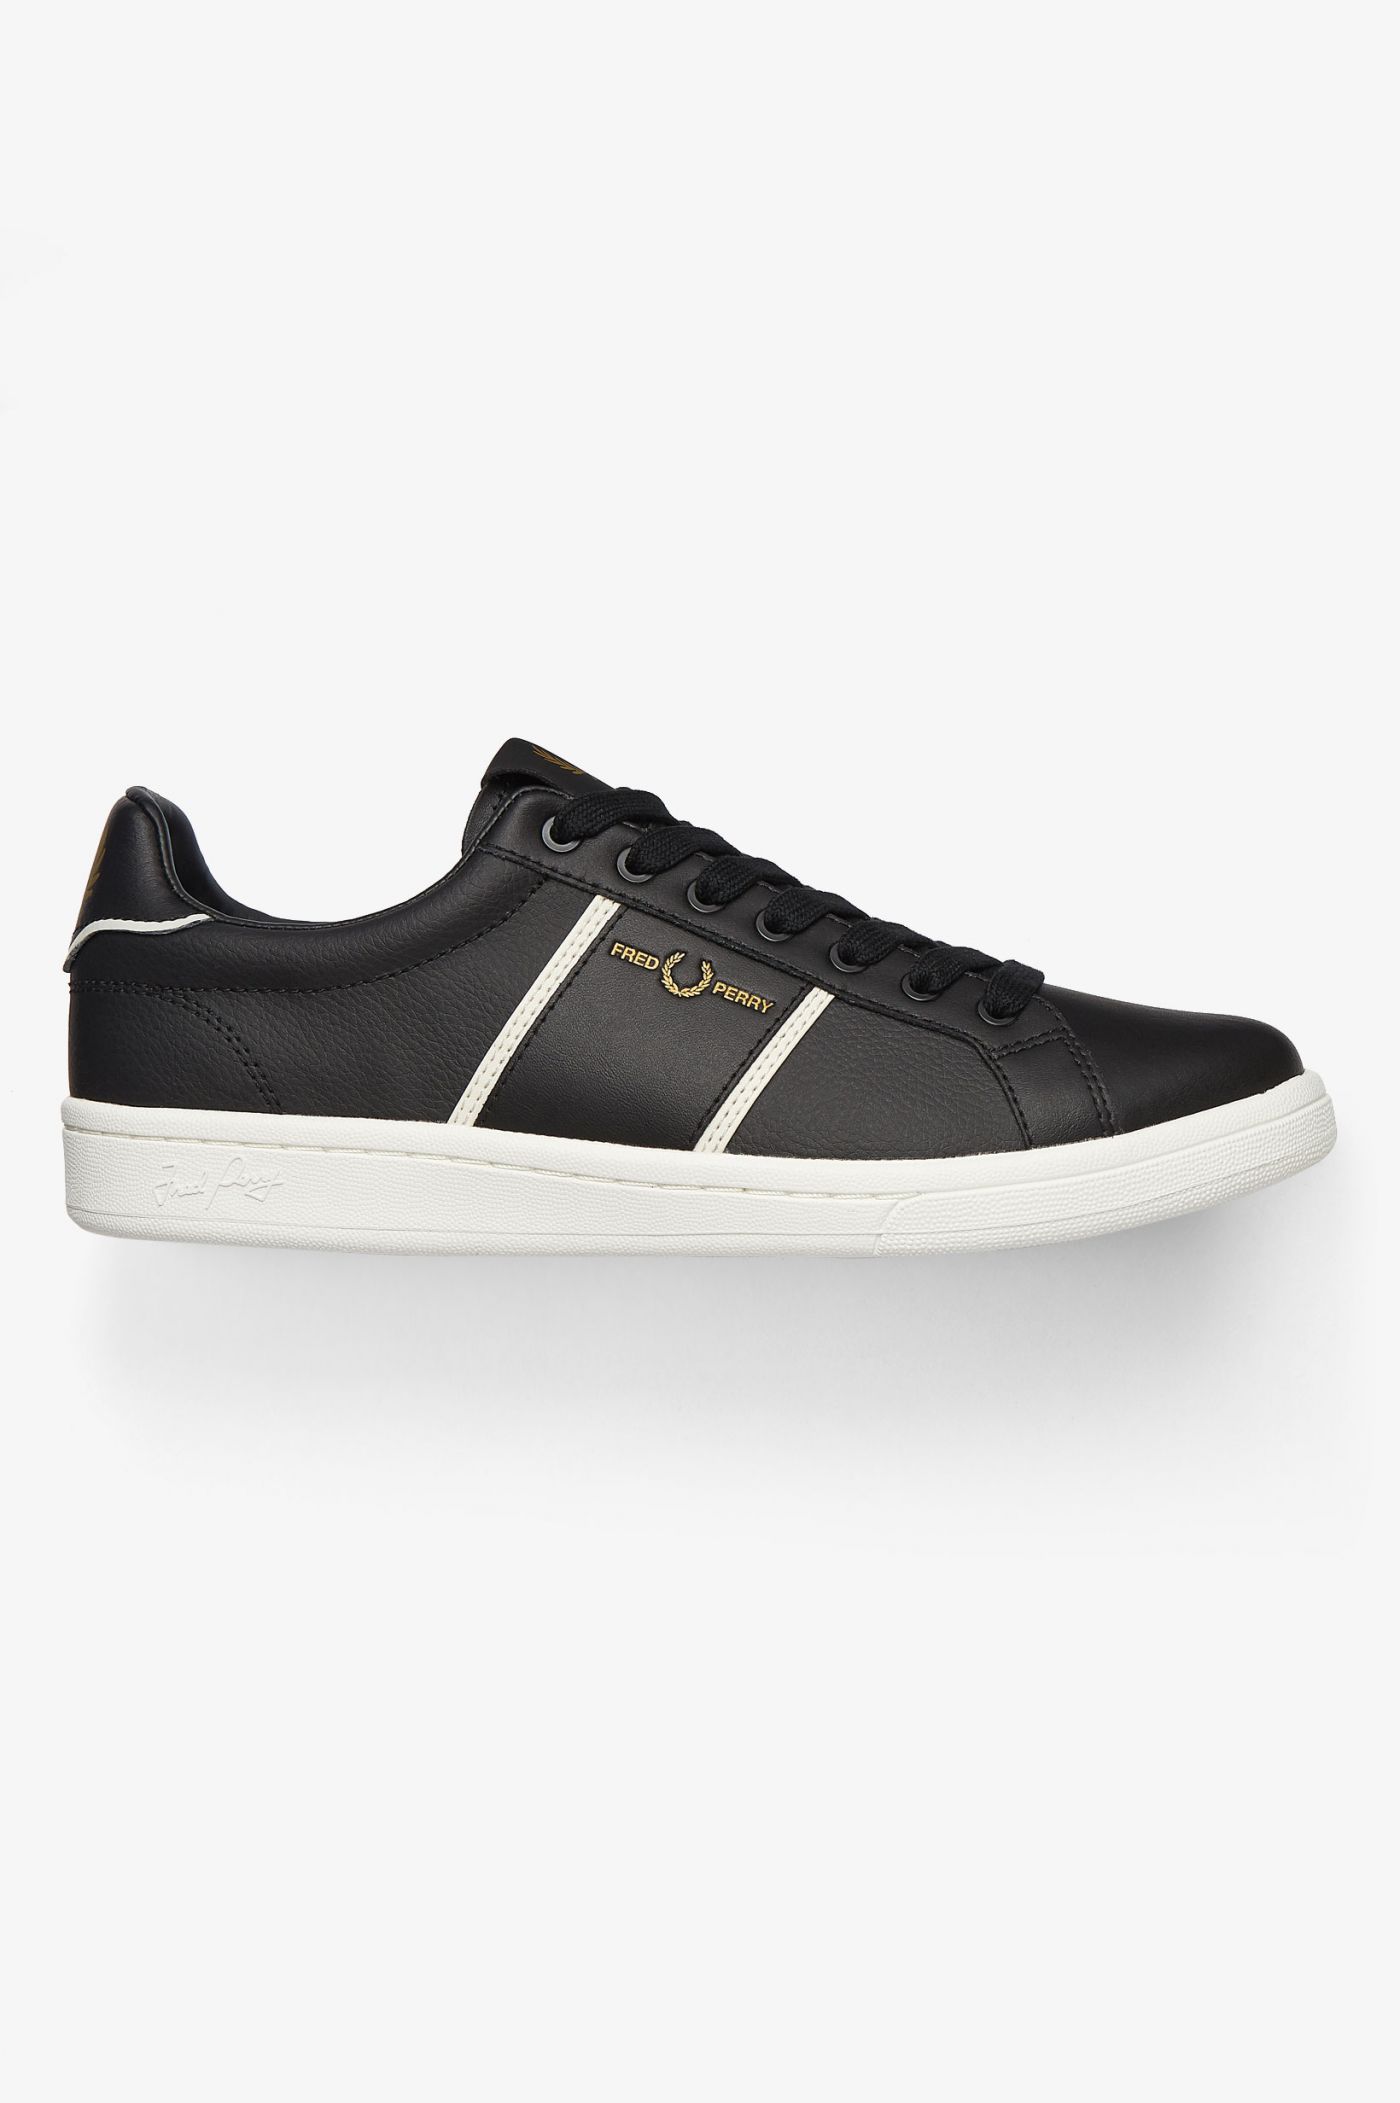 fred perry b721 women's